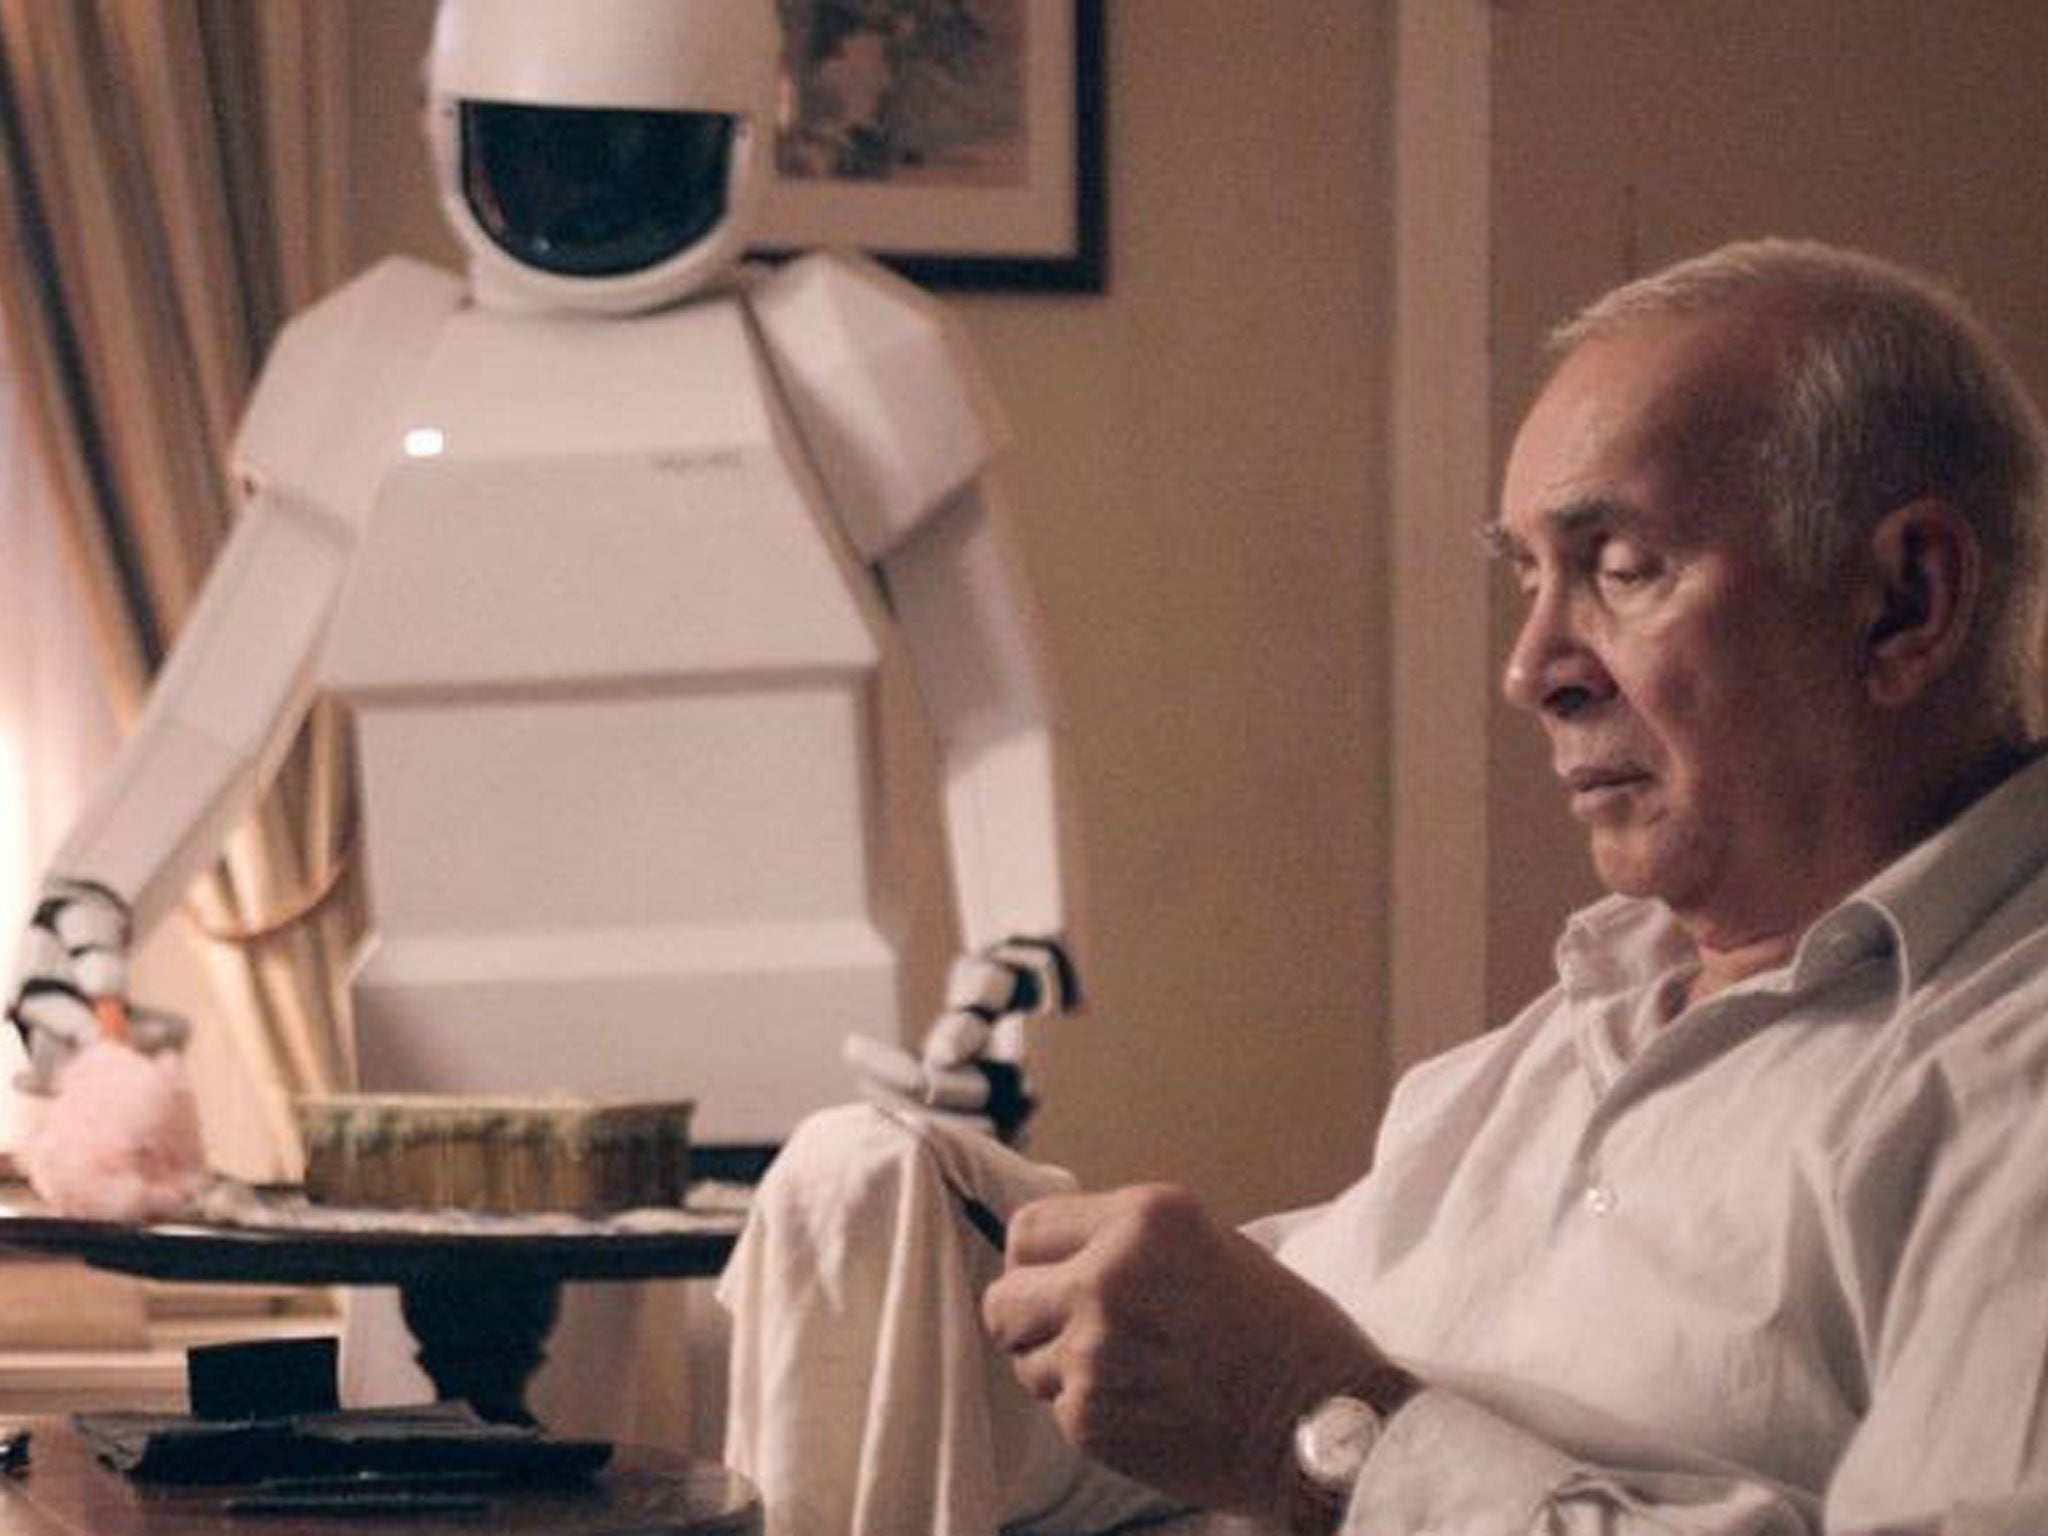 Chip off the old block: the film Frank & Robot featured an electronic companion